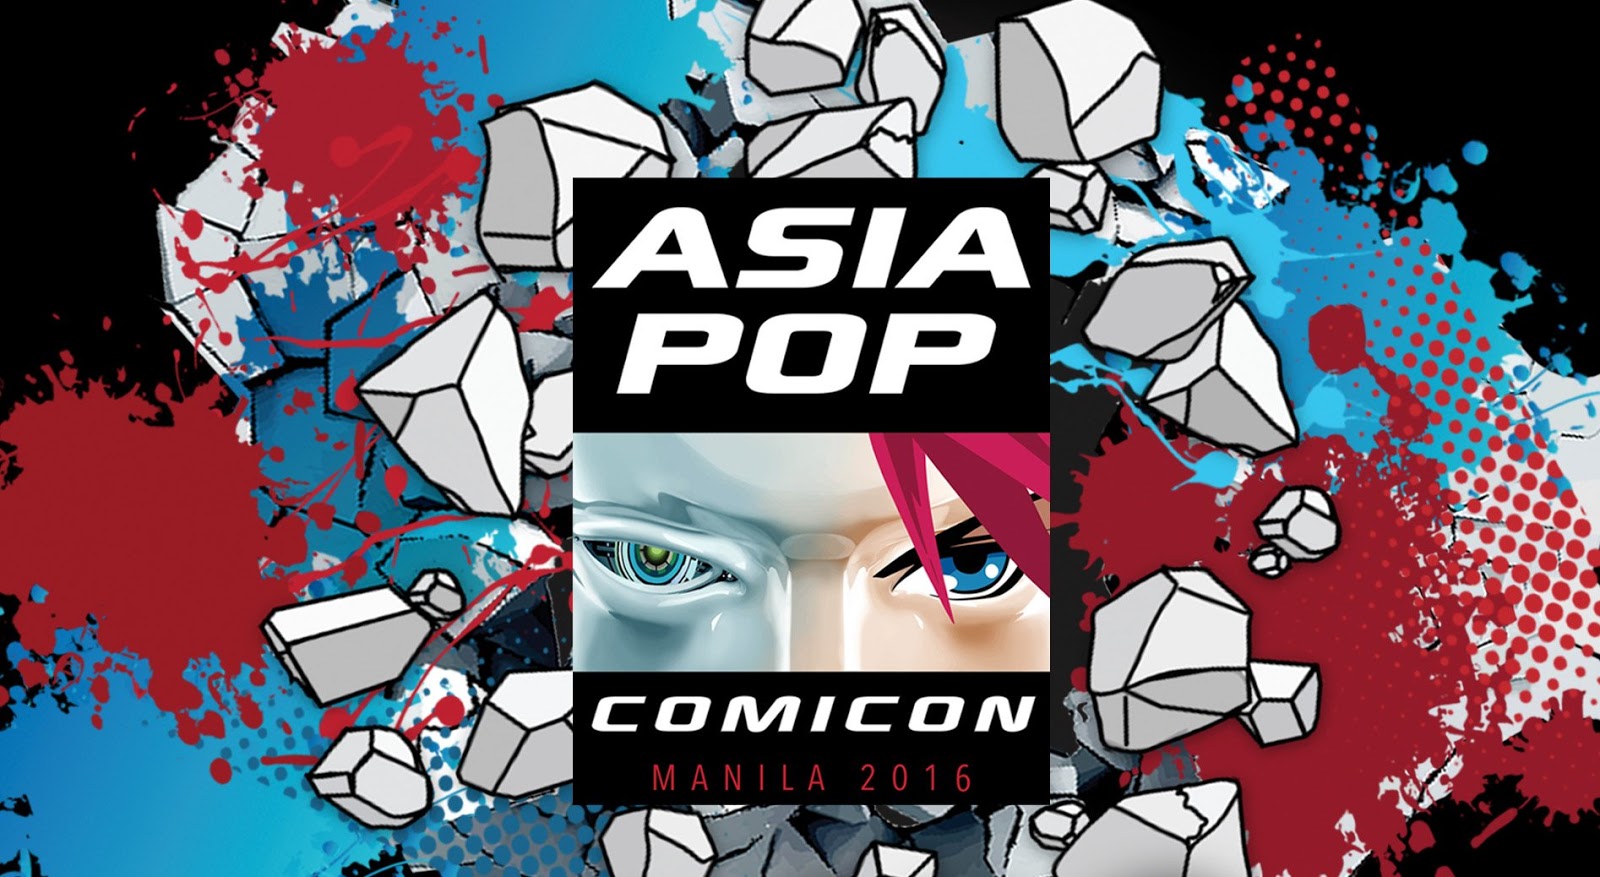 13-facts-about-asiapop-comicon